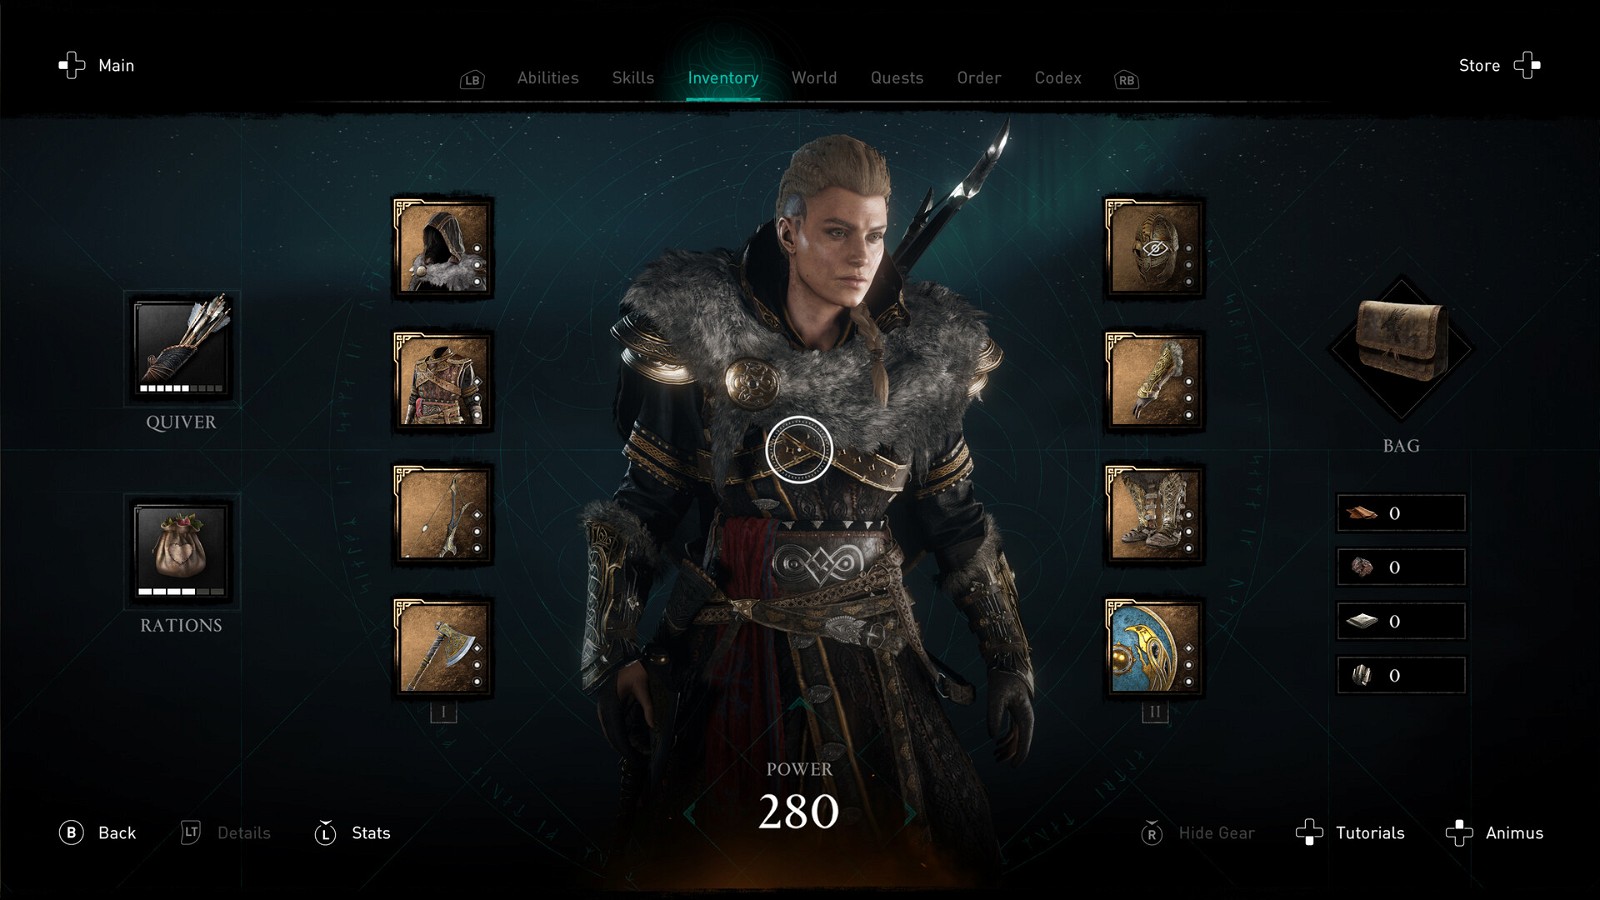 The Latest in the Series, Assassin’s Creed Valhalla, Has a Very Cluttered User Interface